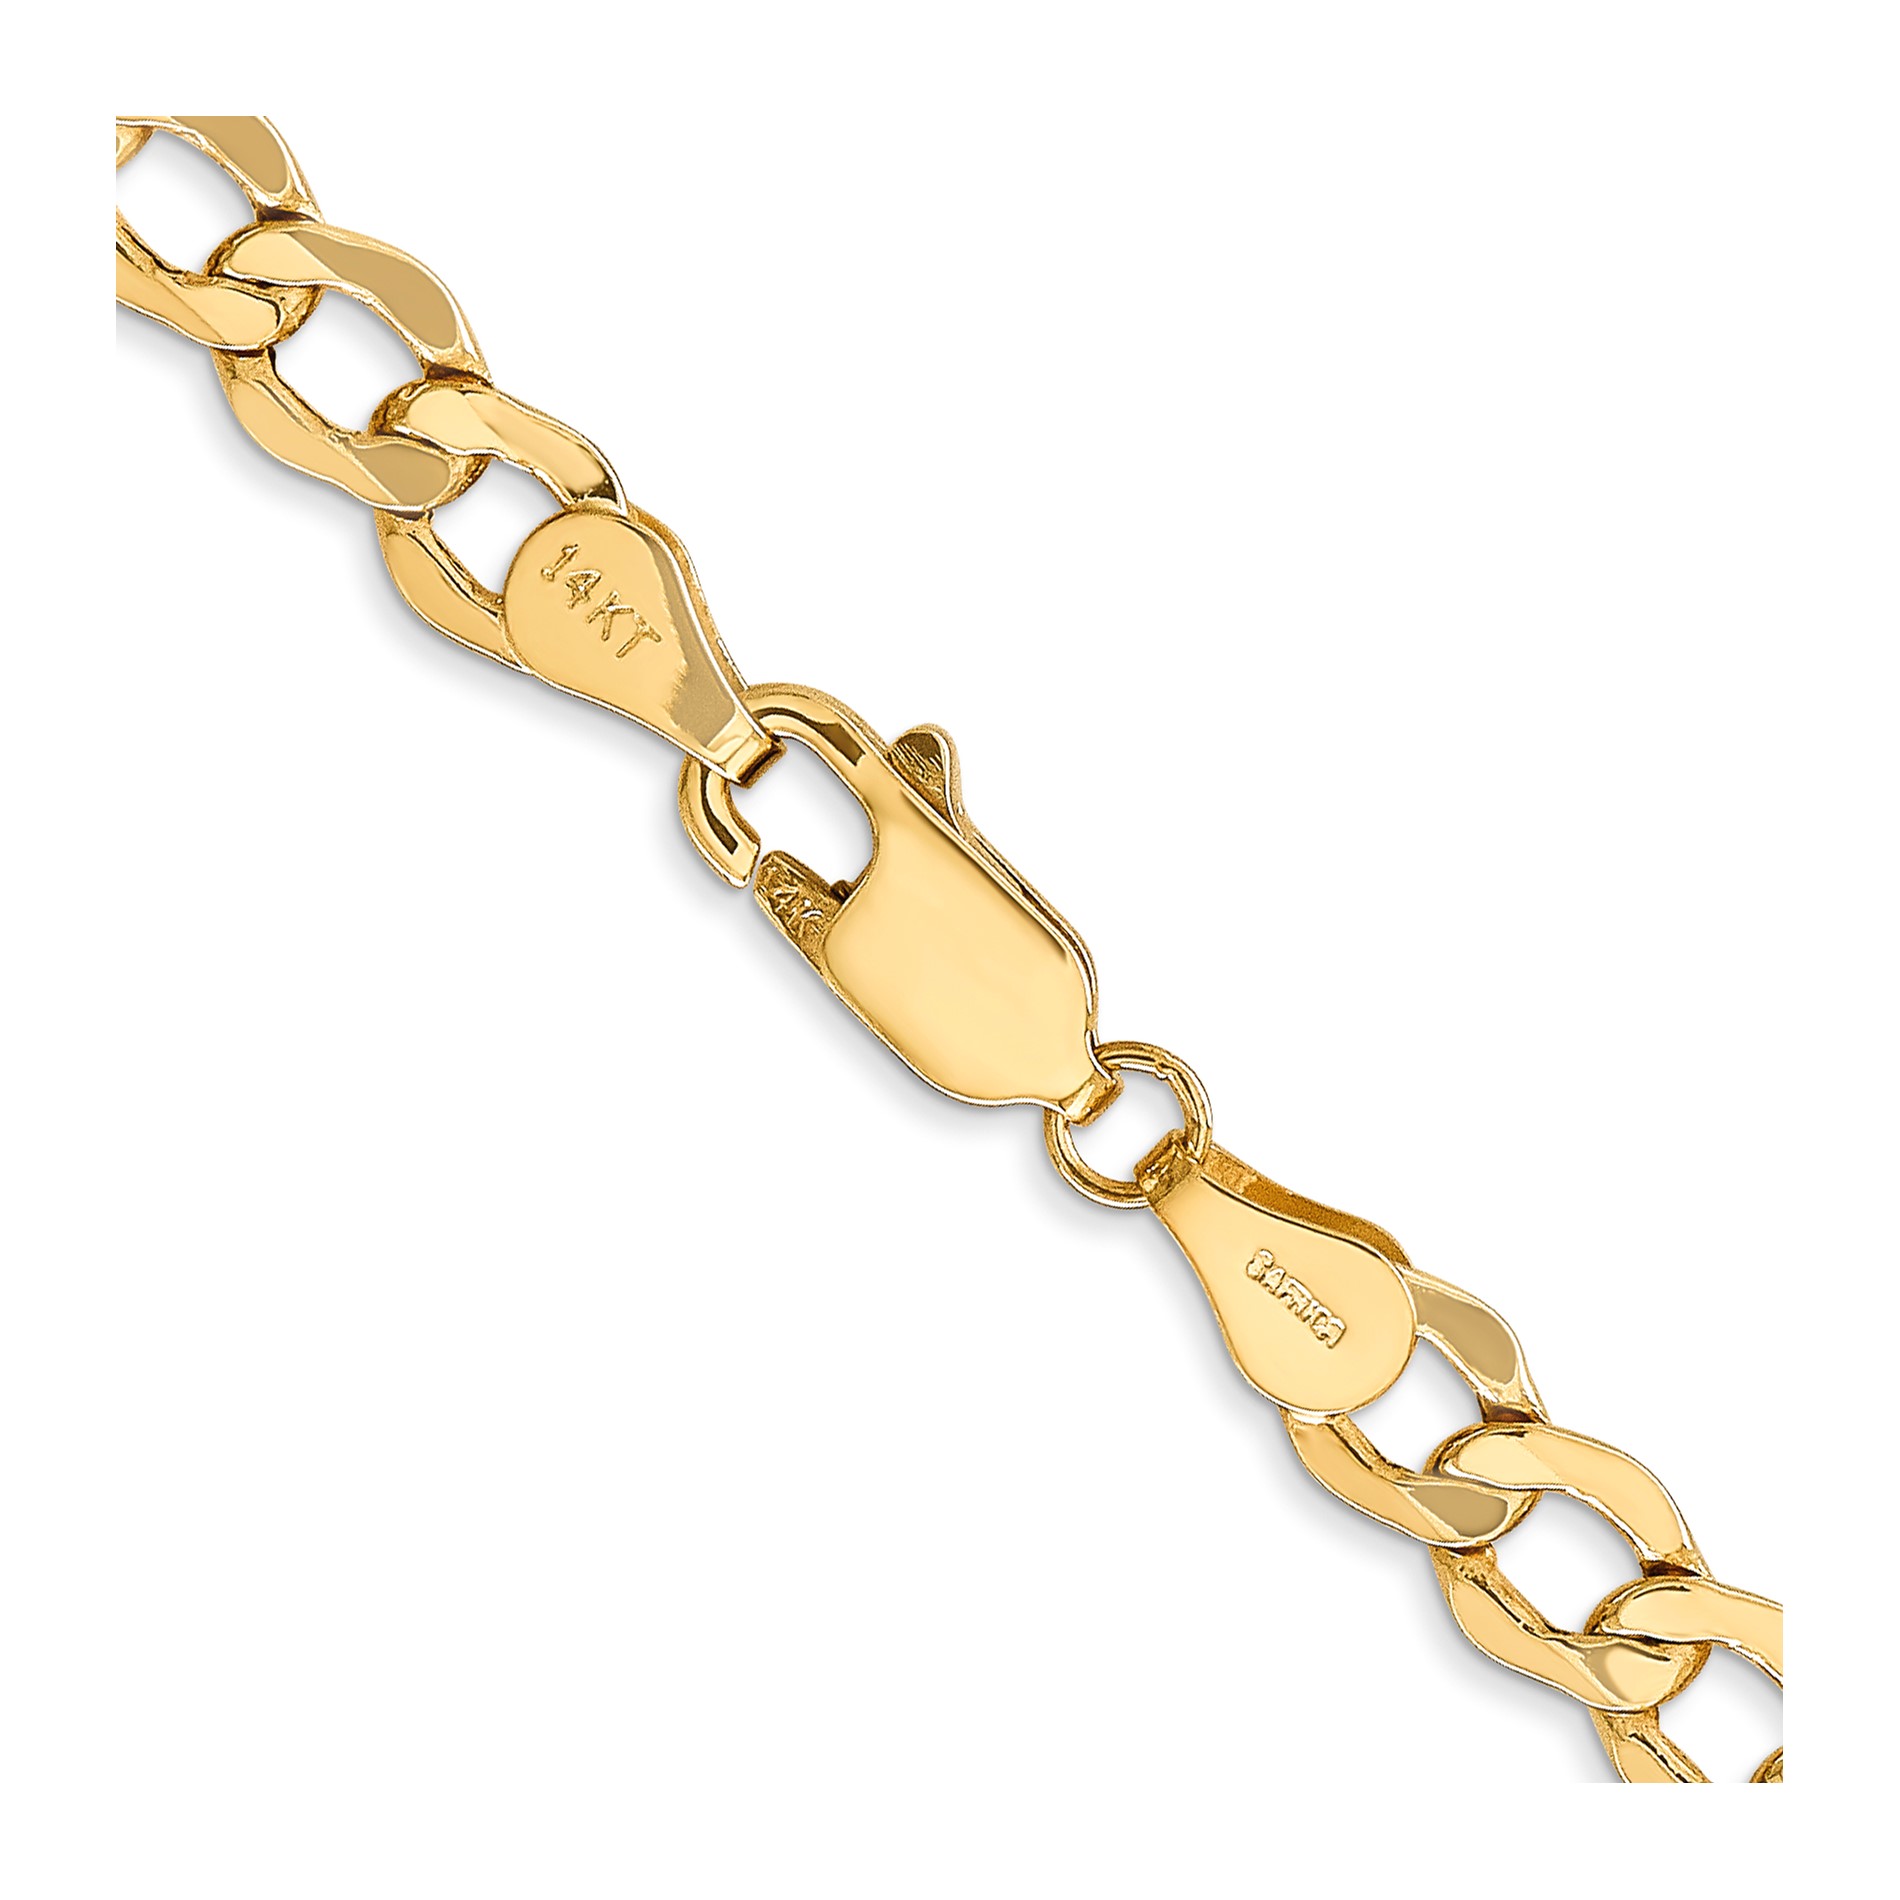 Diamond2Deal 10K Yellow Gold 5.25mm Curb Chain Necklace for Men